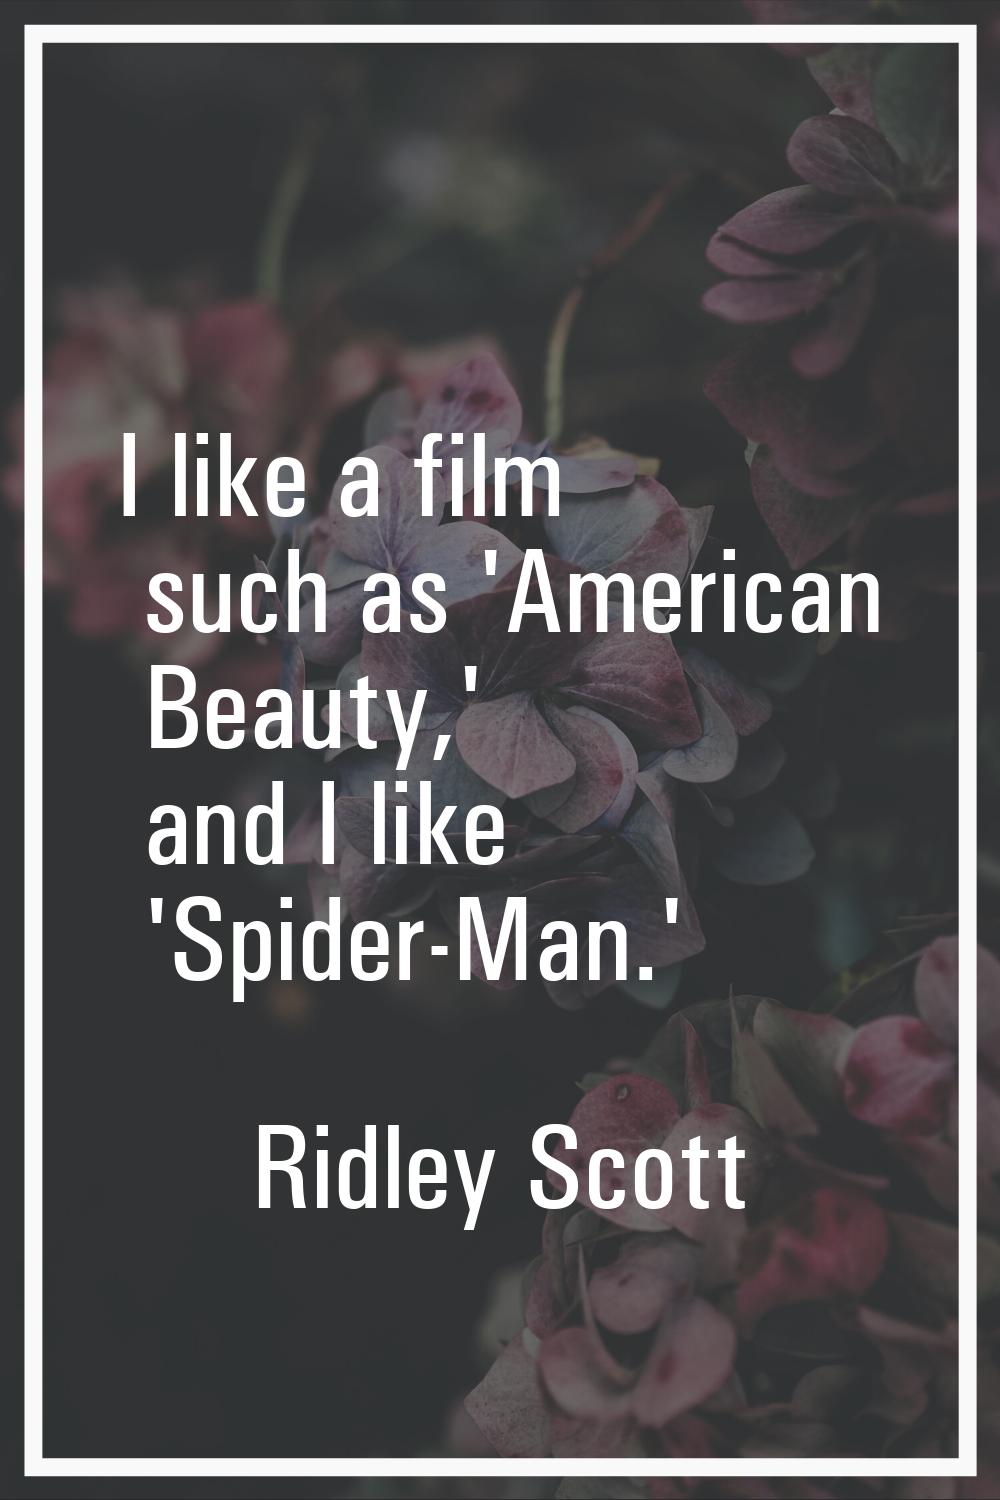 I like a film such as 'American Beauty,' and I like 'Spider-Man.'